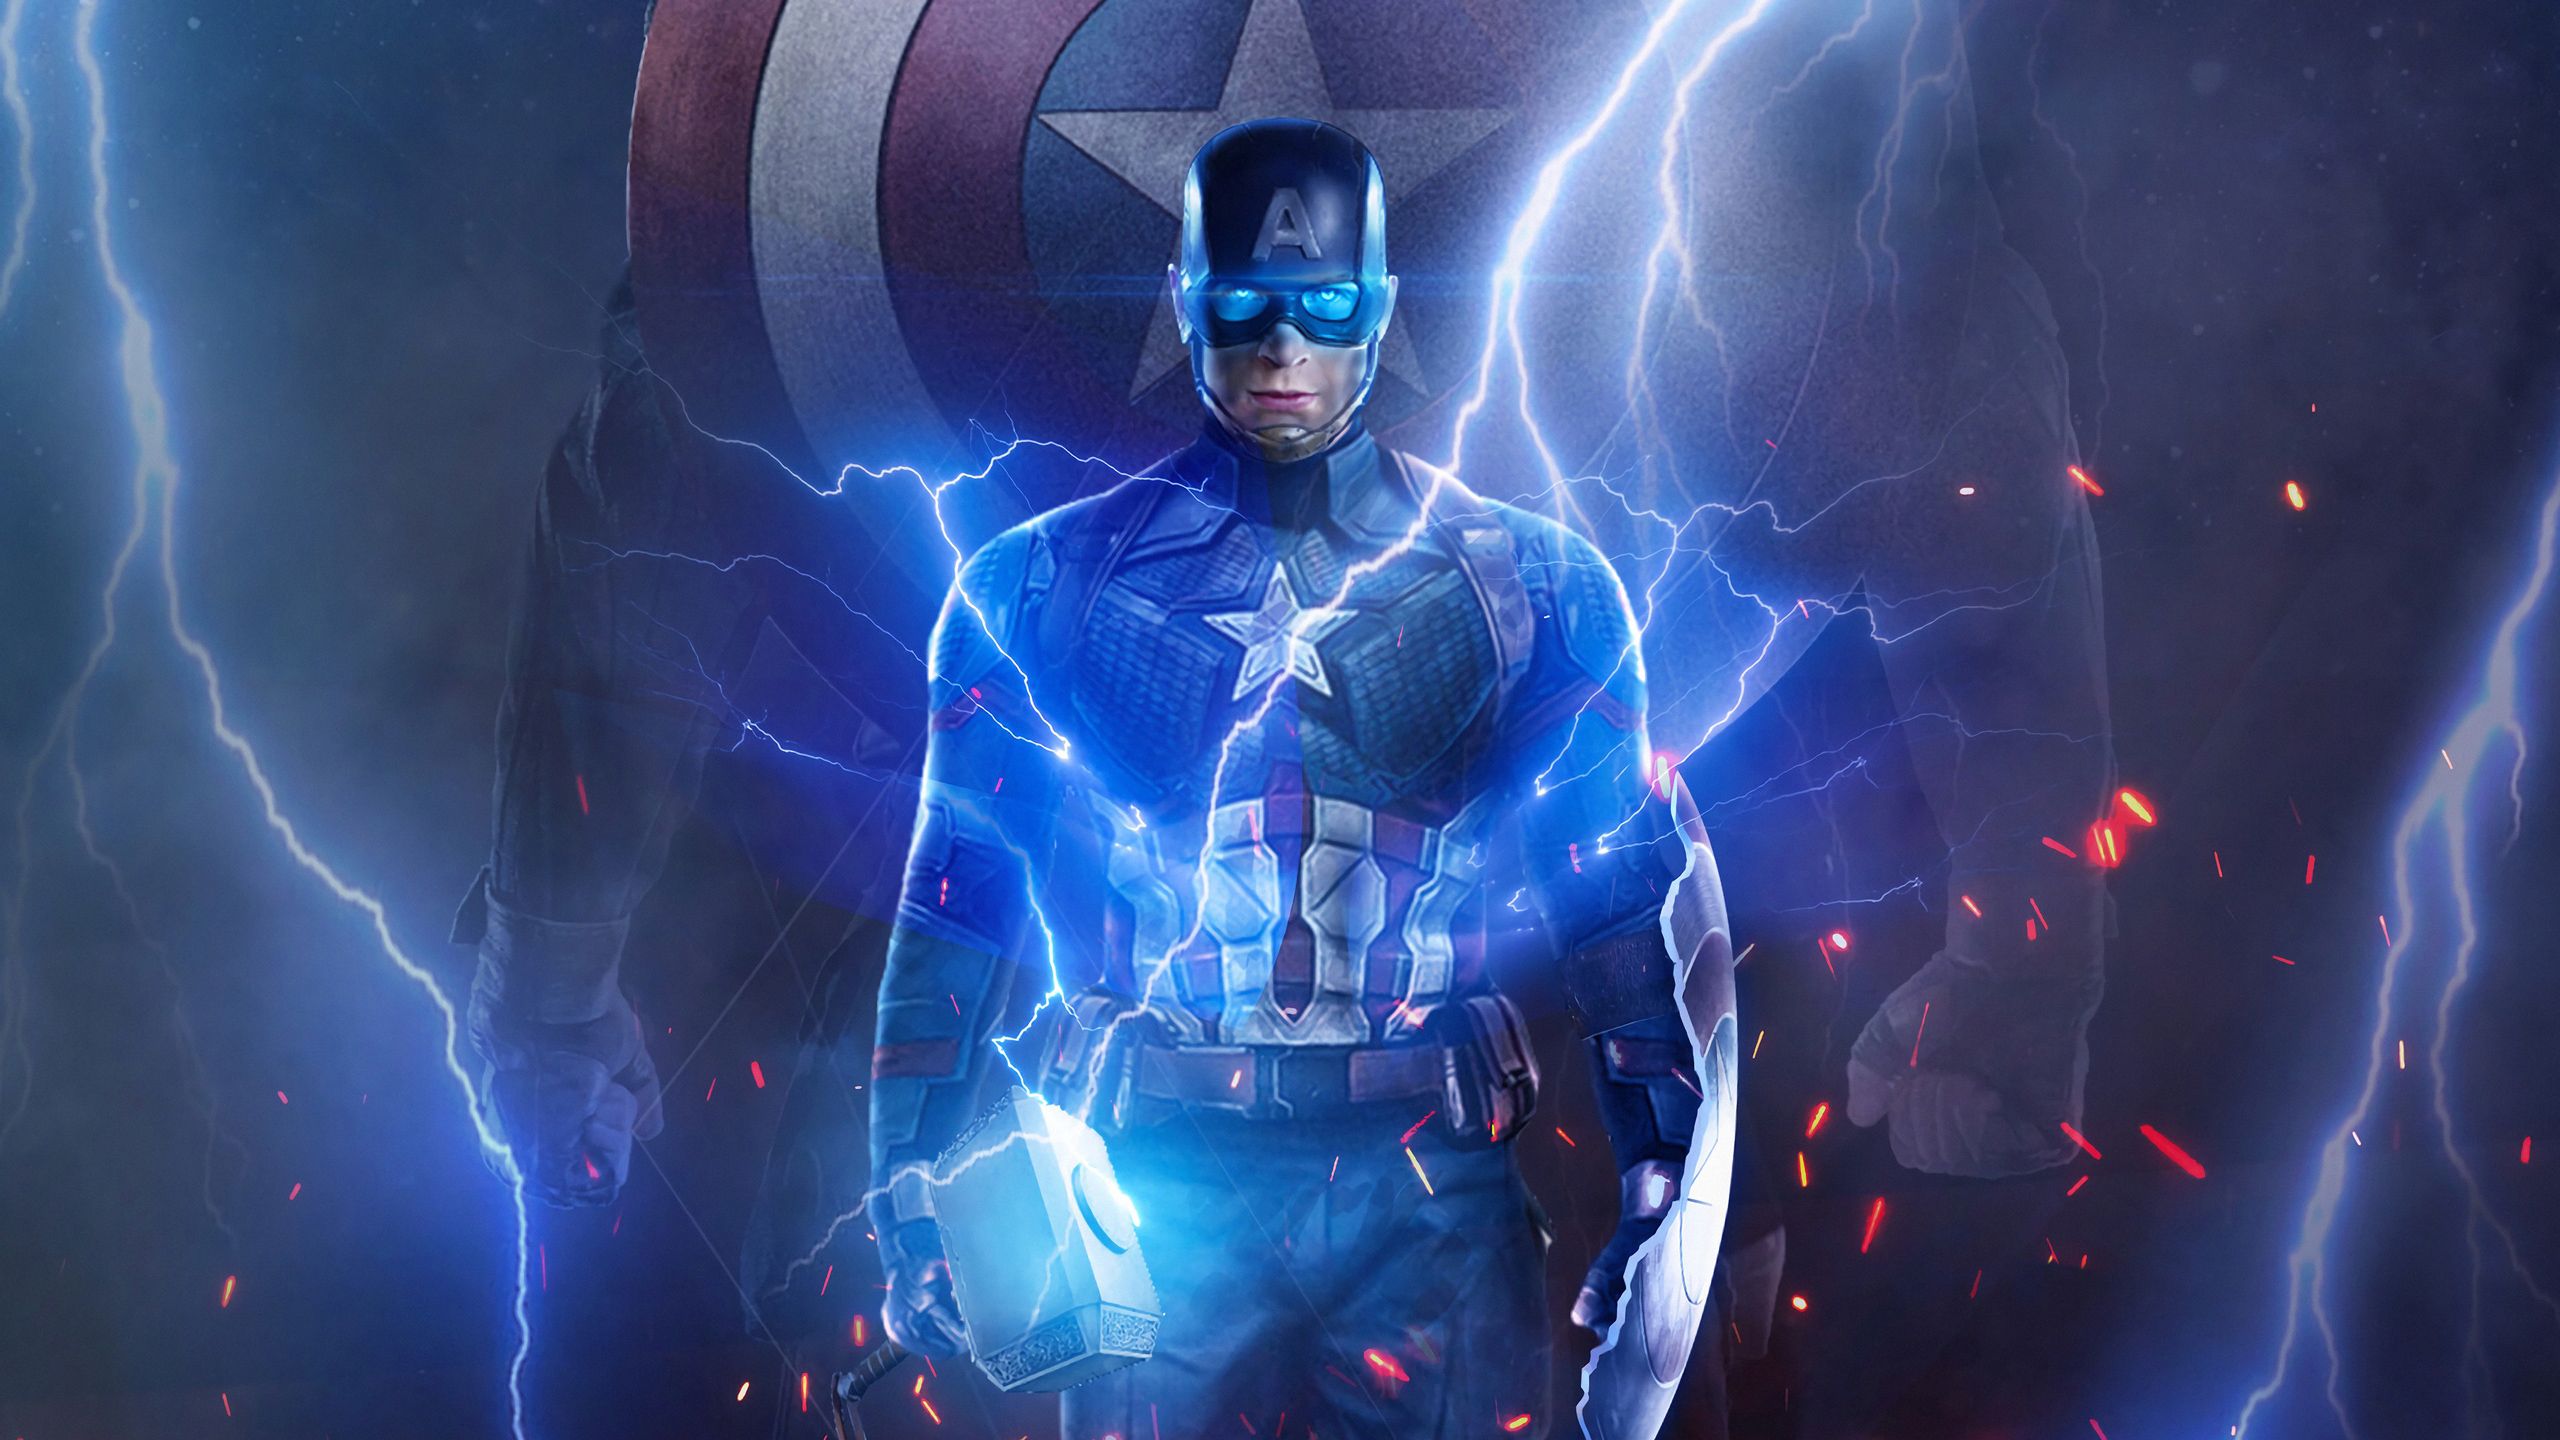 Captain America Worthy Wallpaper Free Captain America Worthy Background